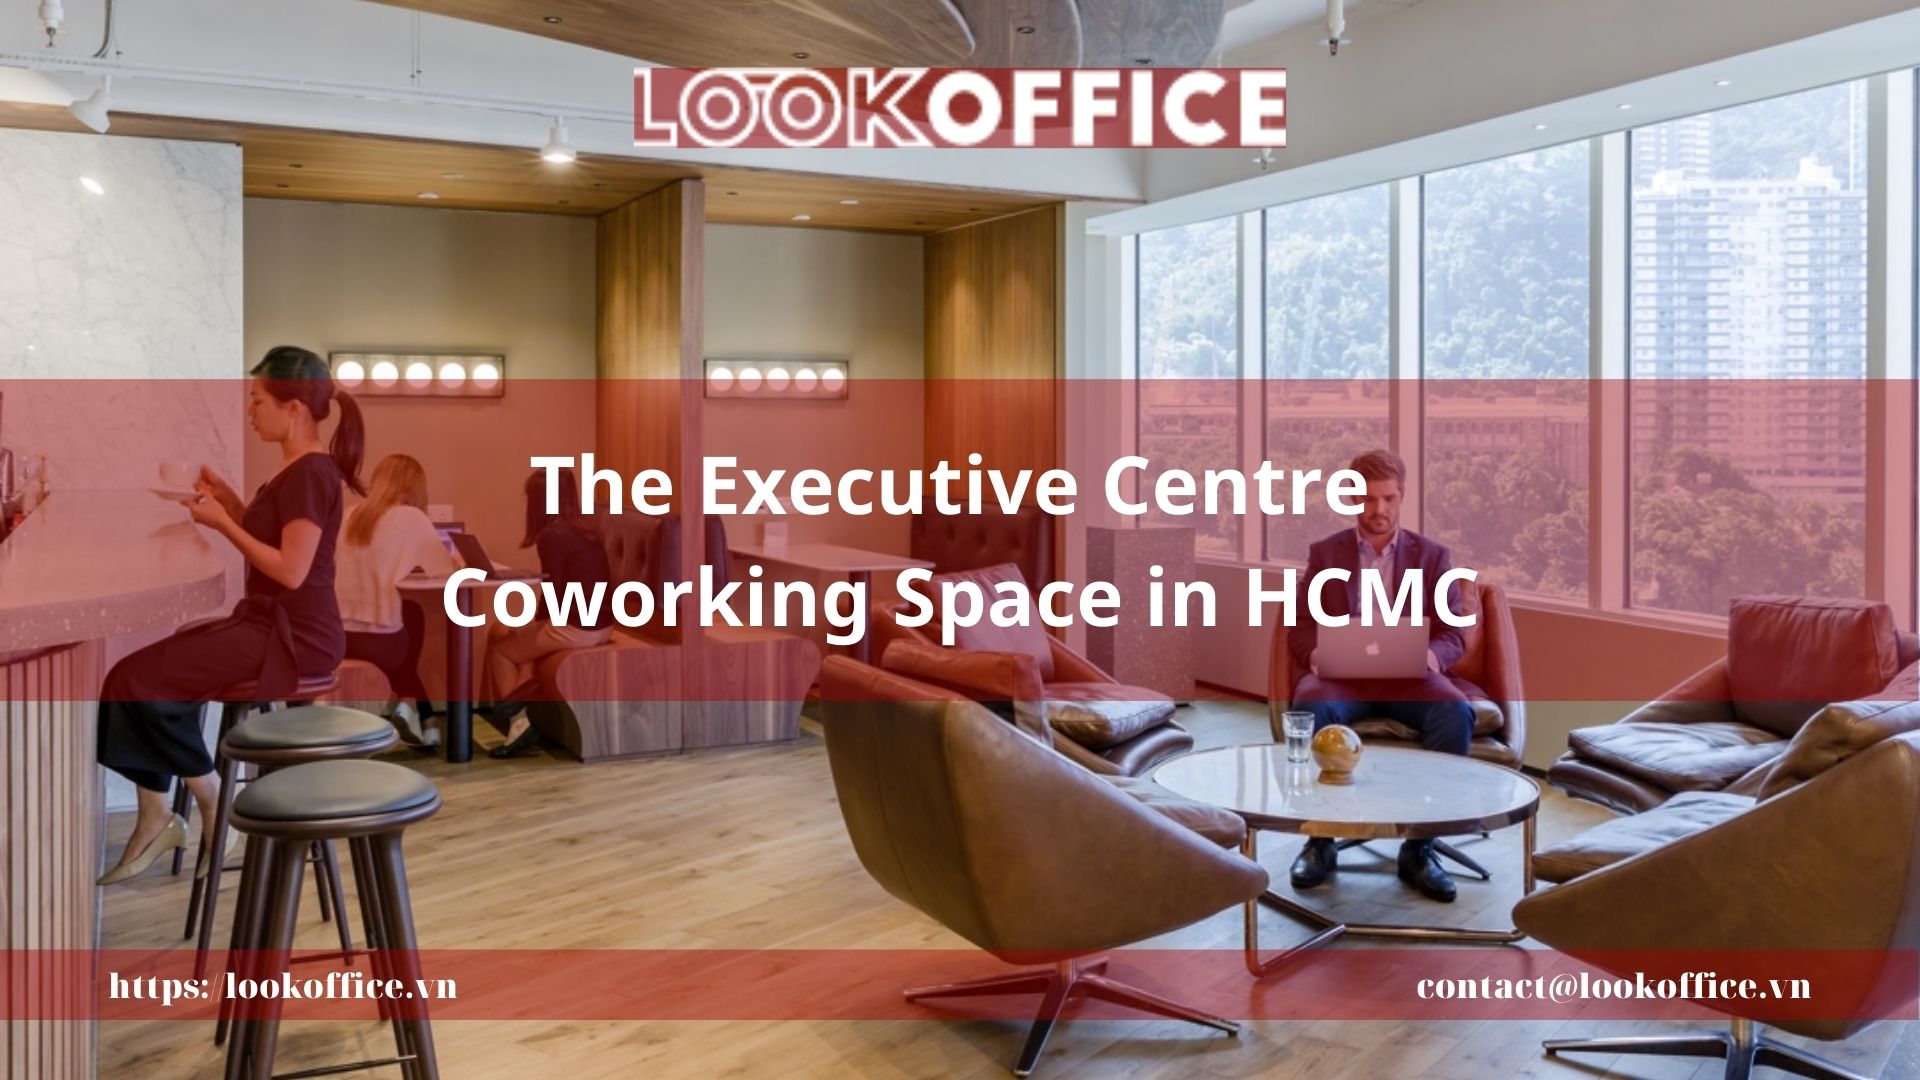 The Executive Centre Coworking Space in HCMC